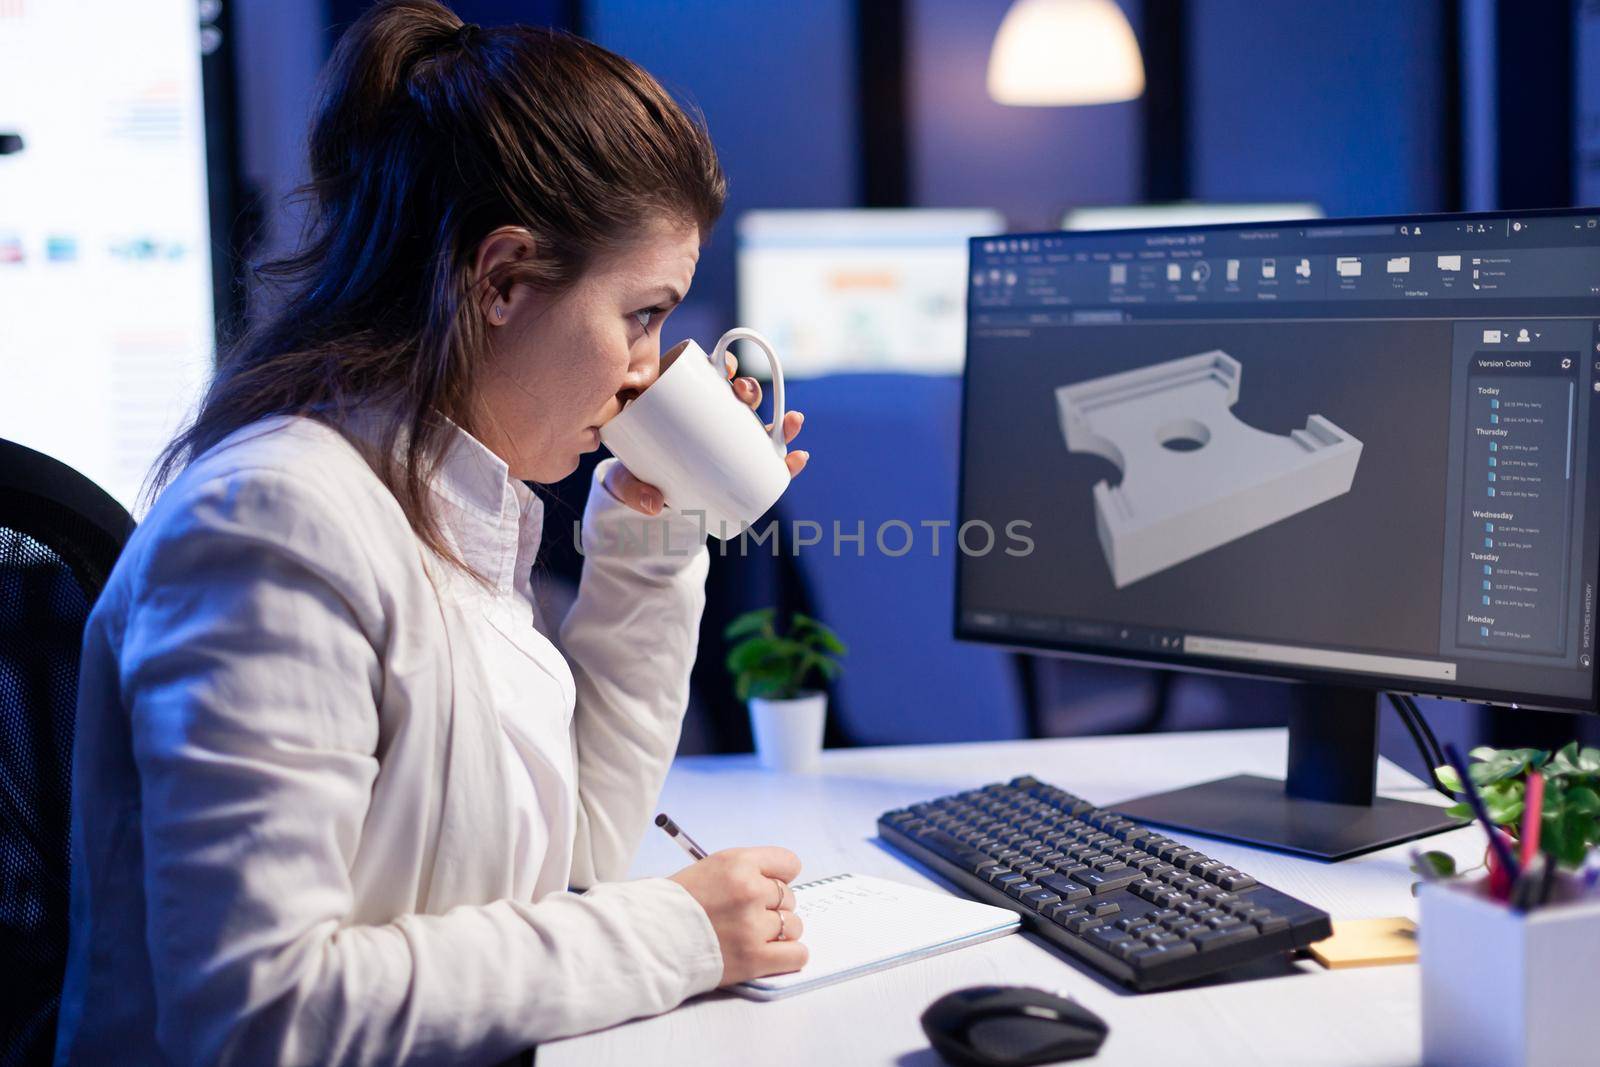 Software engineer working at digital cad project late at night in office company by DCStudio